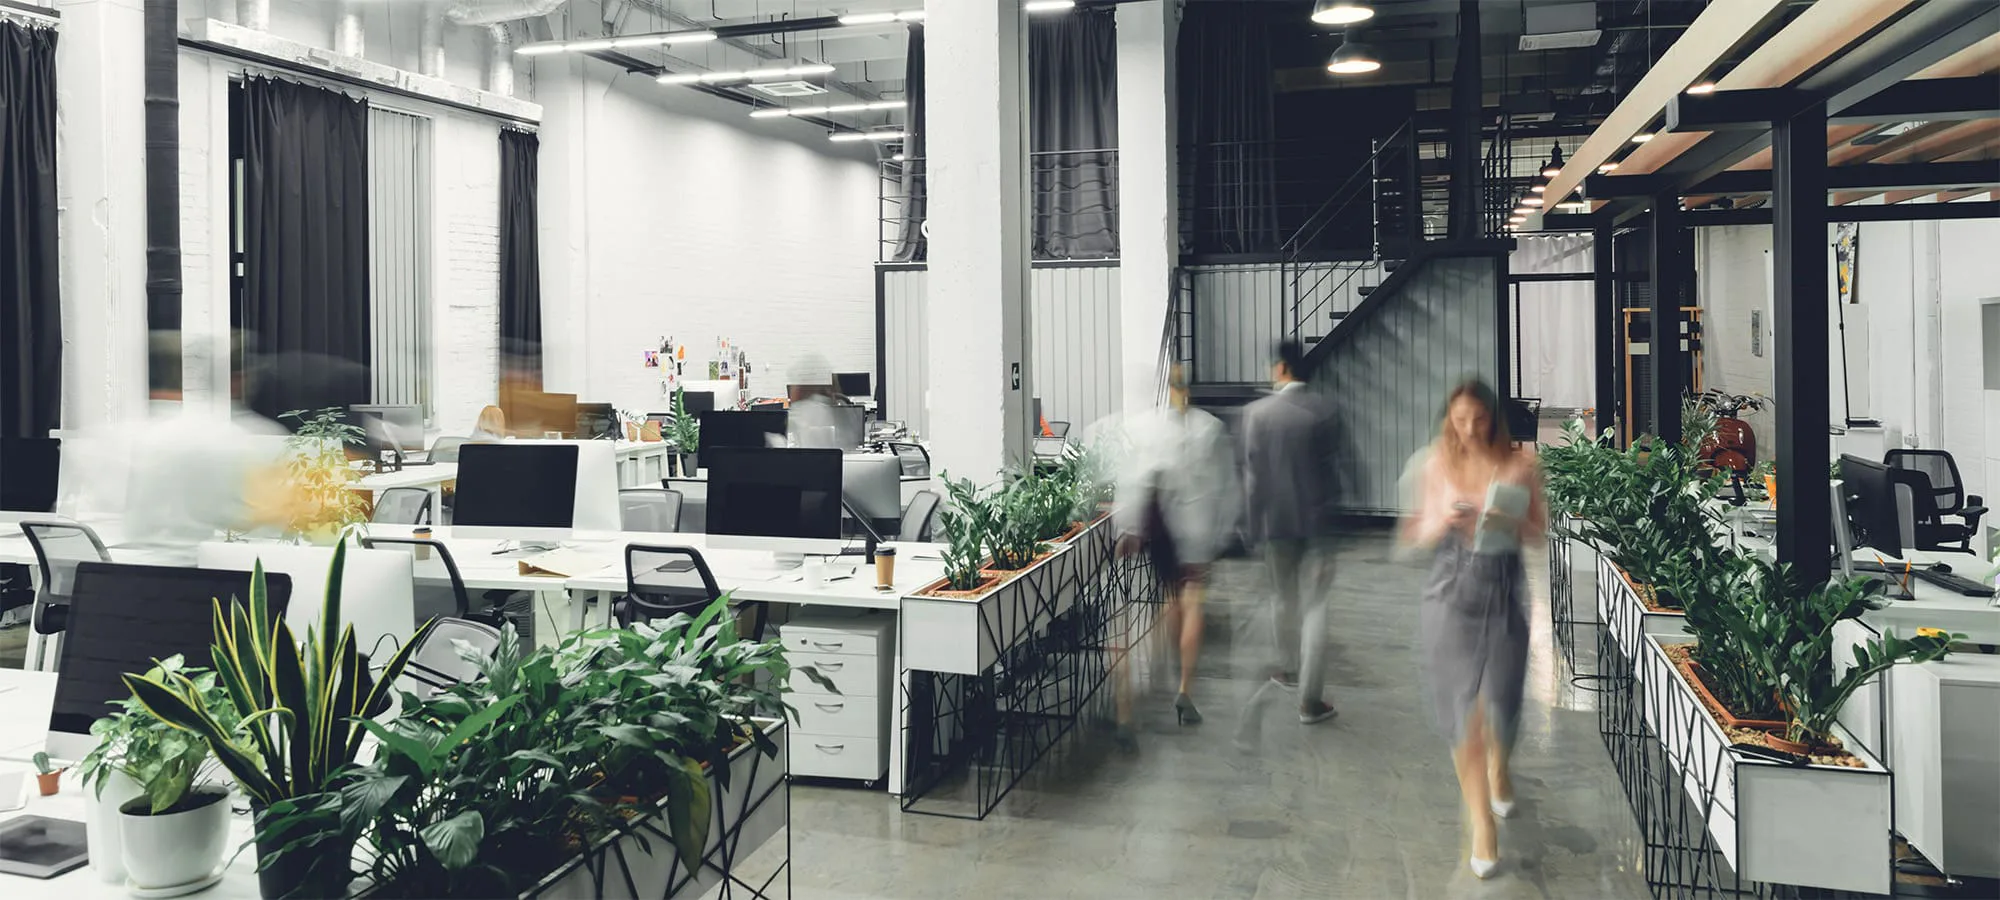 open plan office space with employees moving around